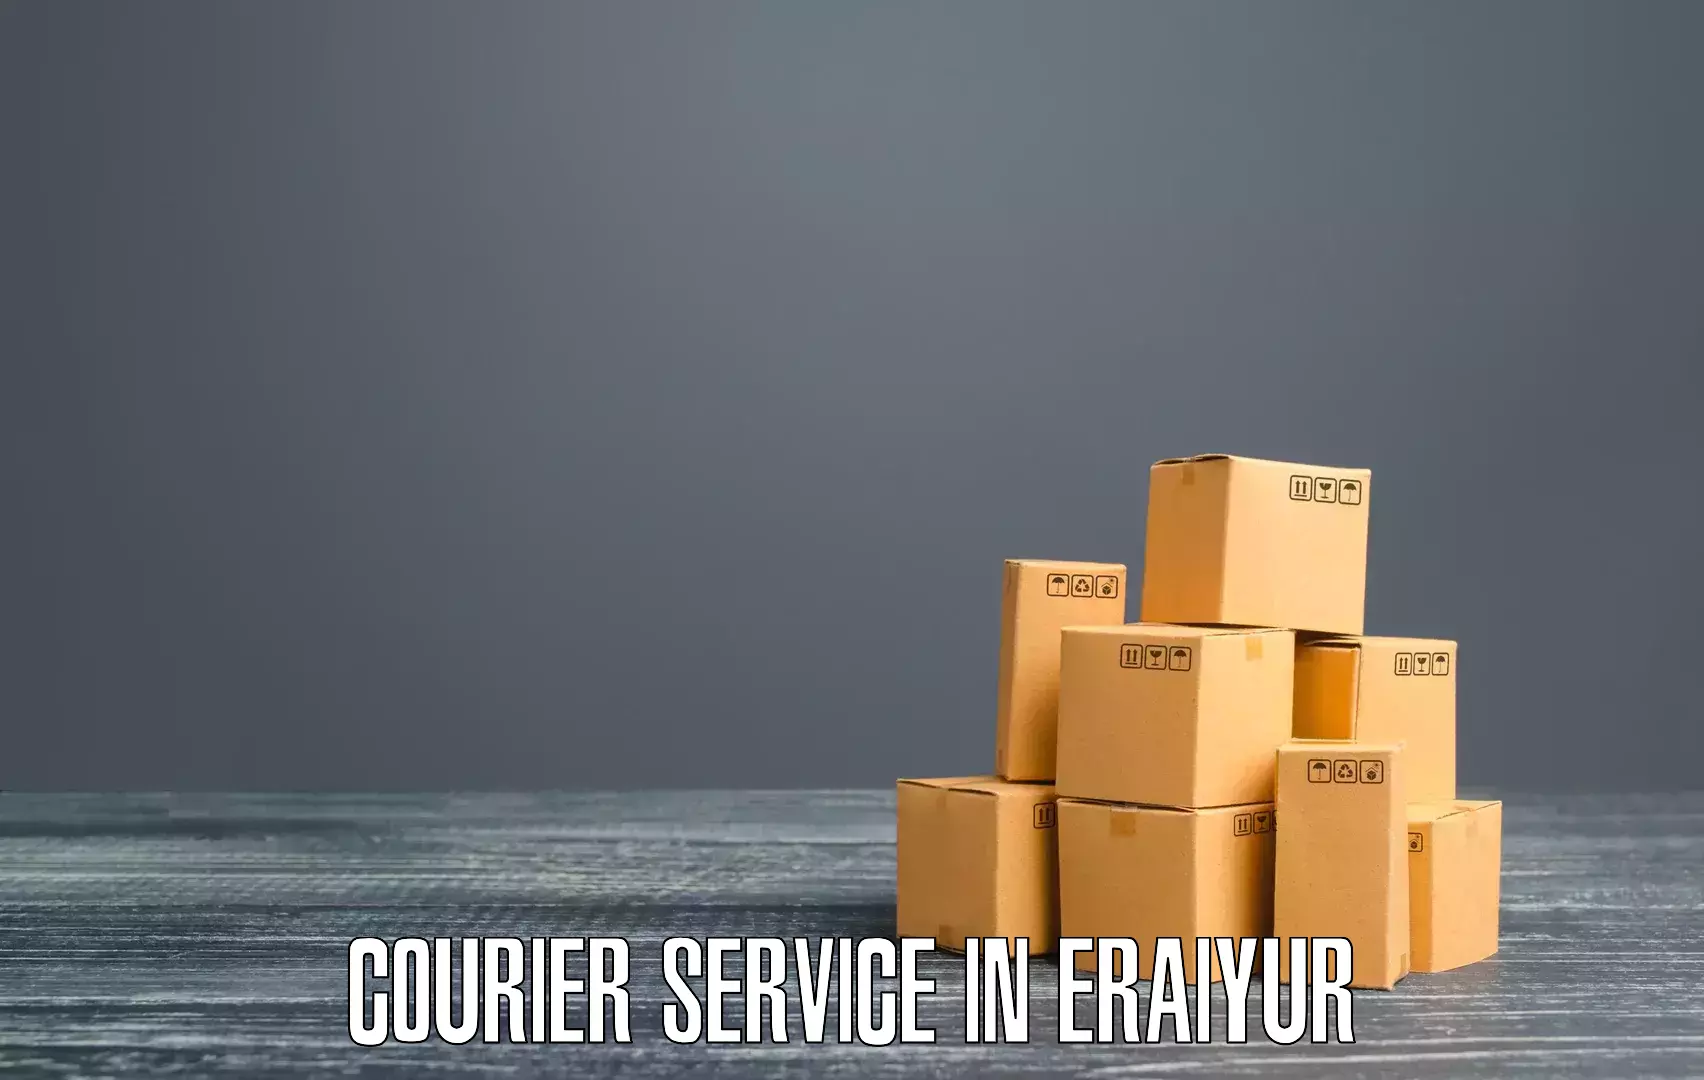 Efficient shipping operations in Eraiyur